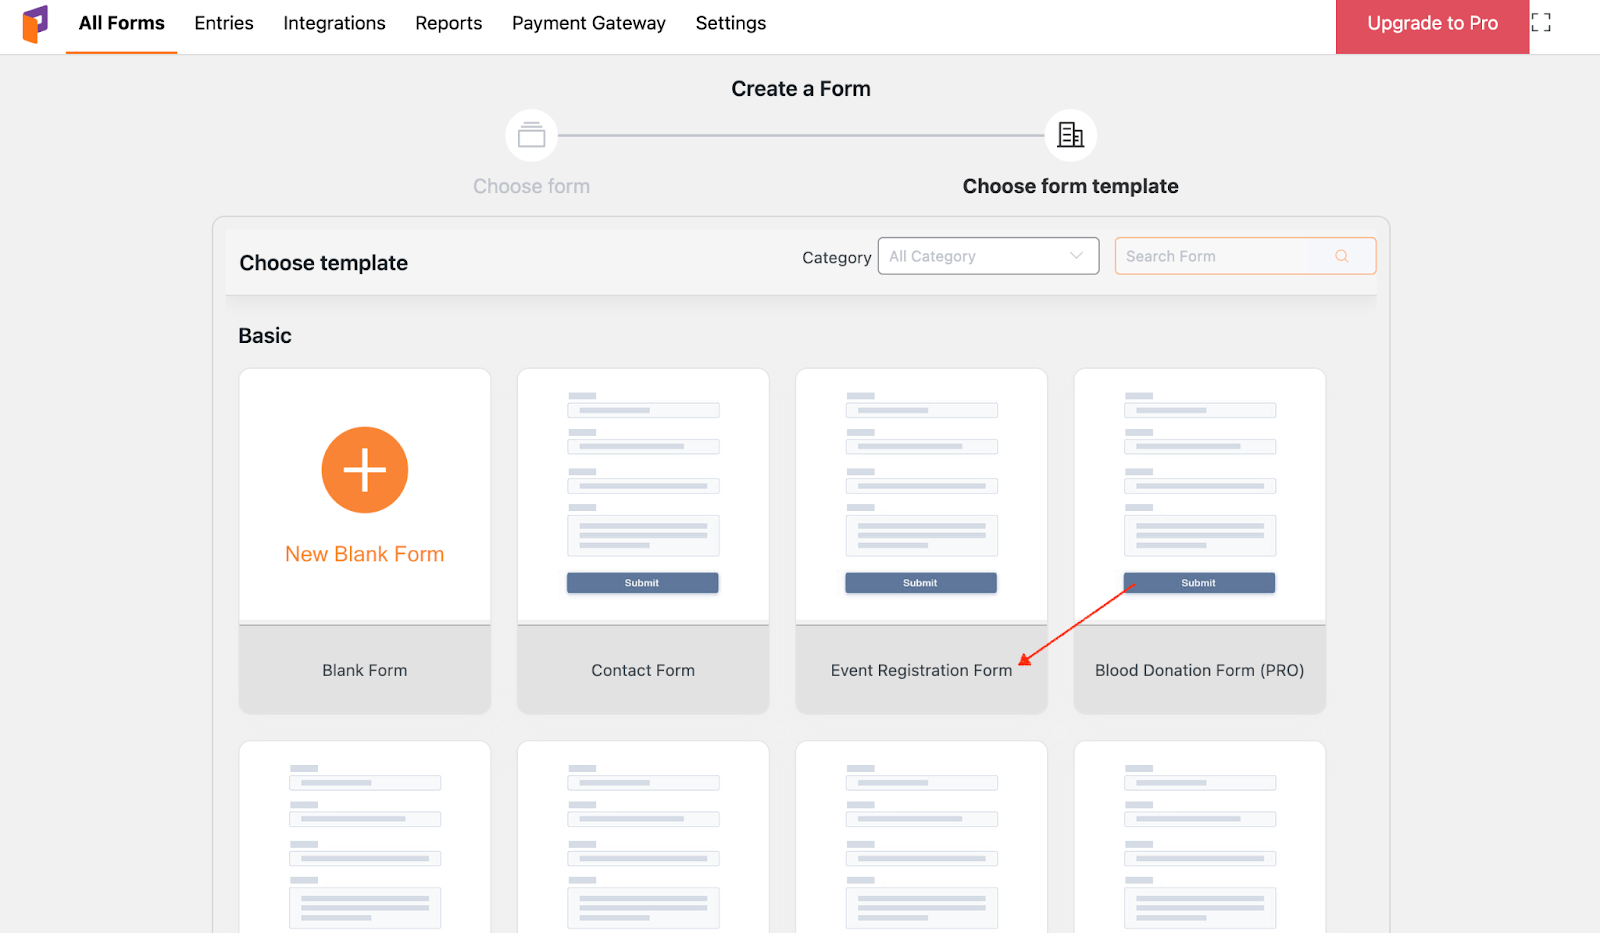 creating an event registration form in paymattic